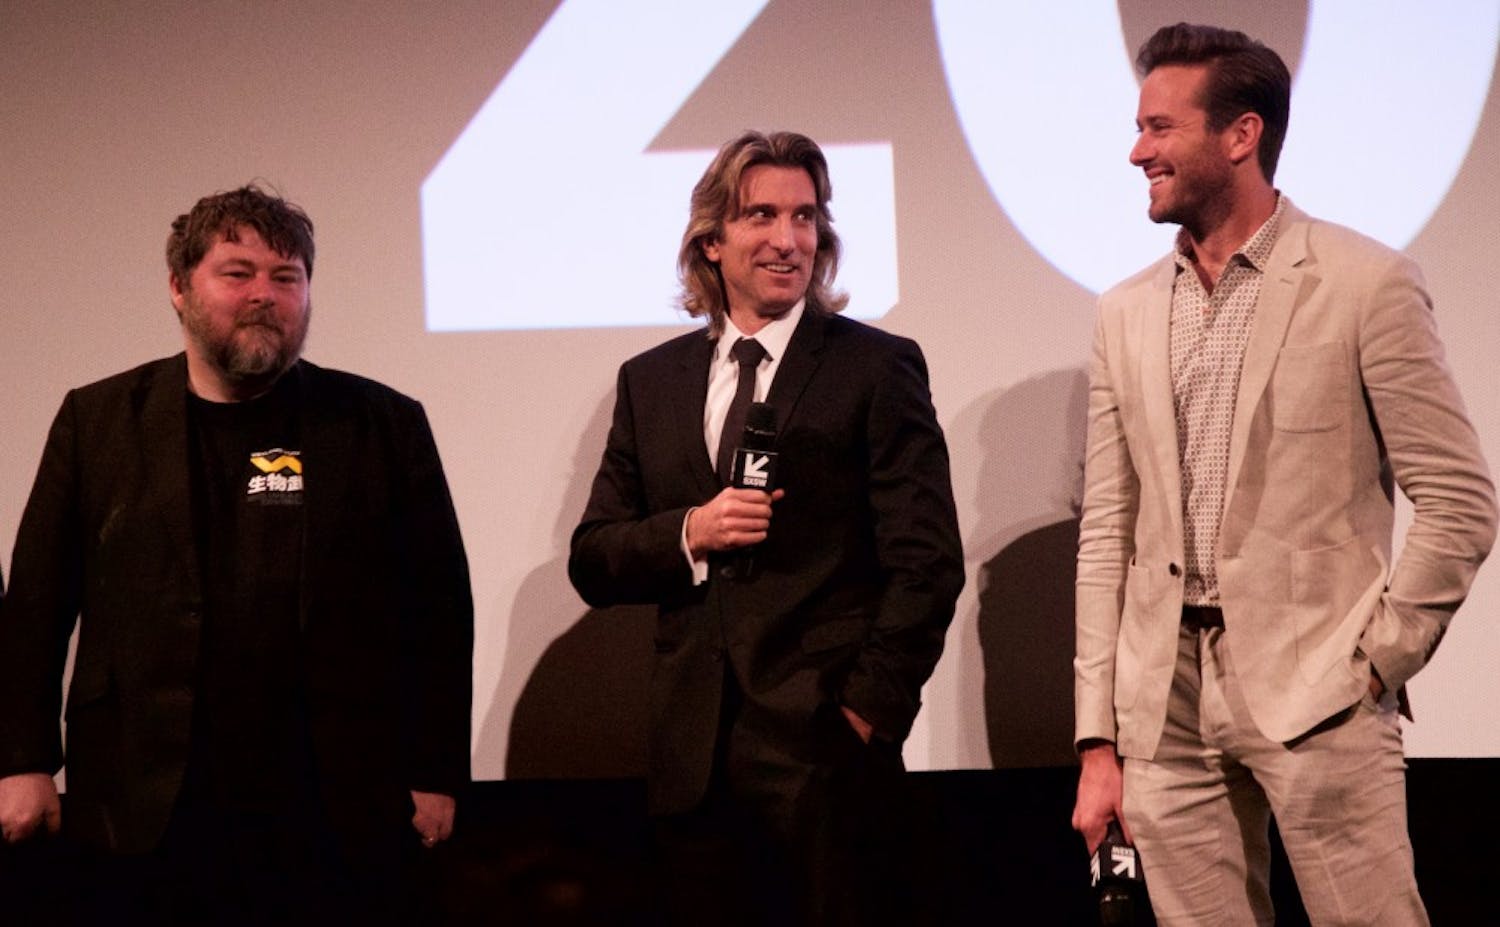 From left: Ben Wheatley, Sharlto Copley and Armie Hammer attended the&nbsp;premiere of "Free Fire" at SXSW.